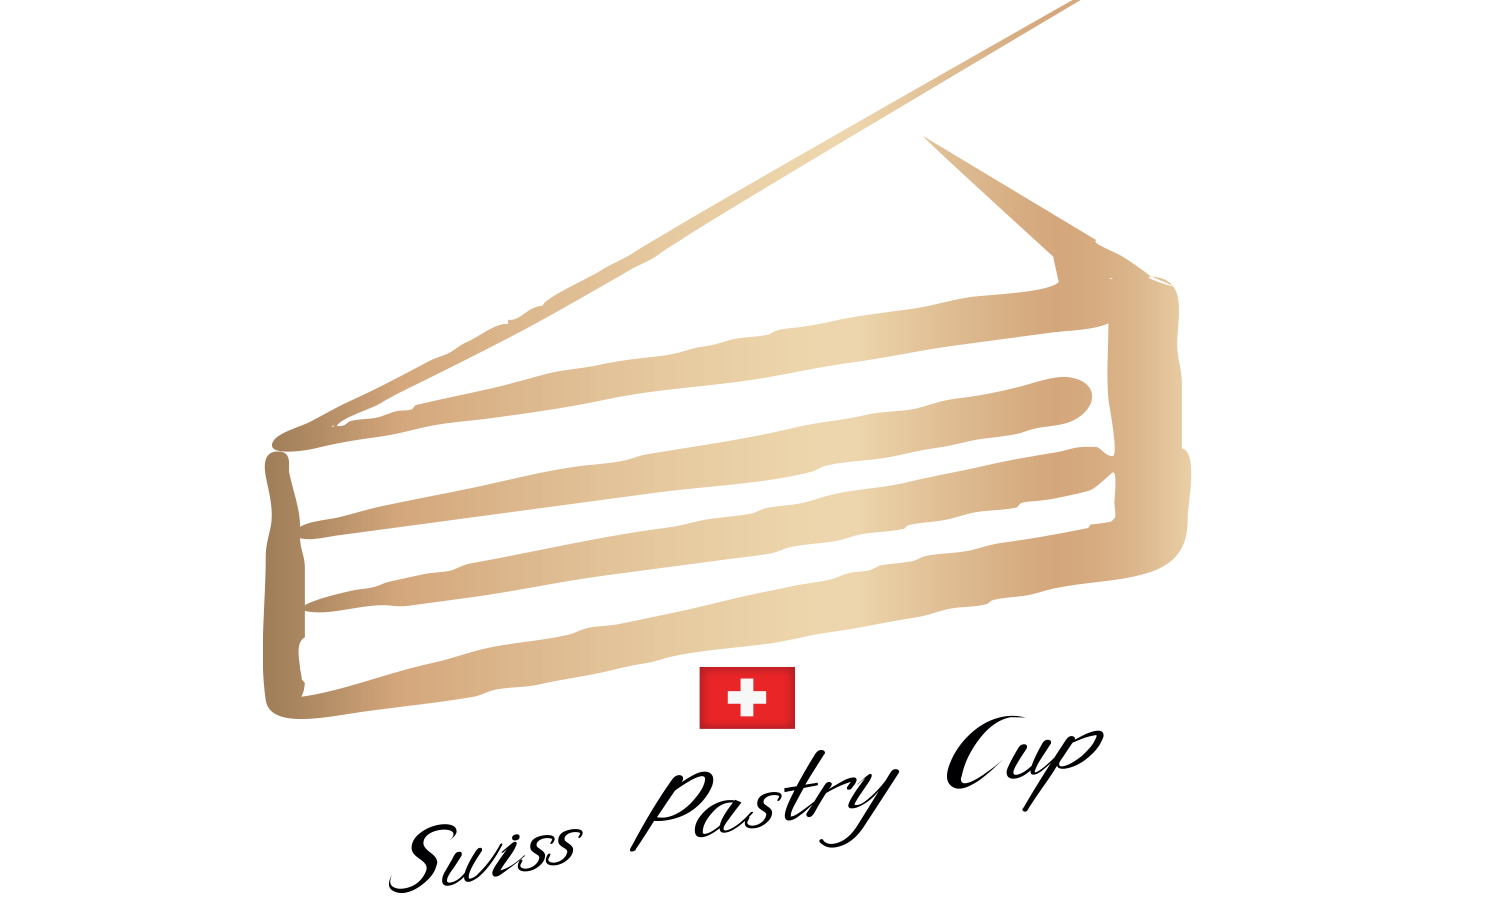 swiss party cup - cook's'show